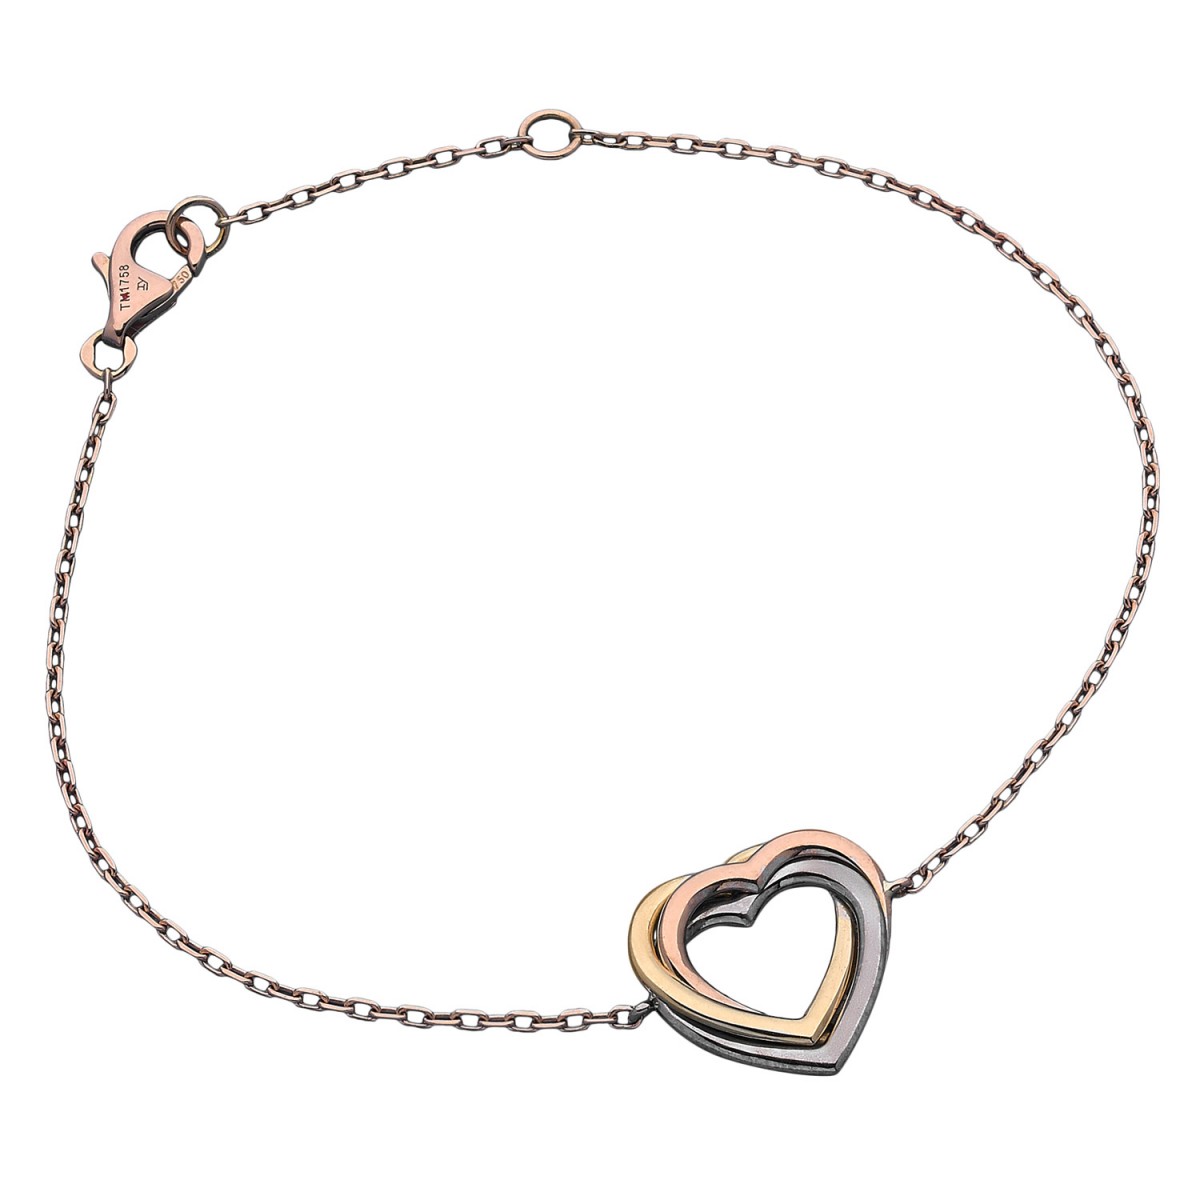 Chelsea Bangle with Heart Pendants in 18k Rose Gold Plating - MYKA